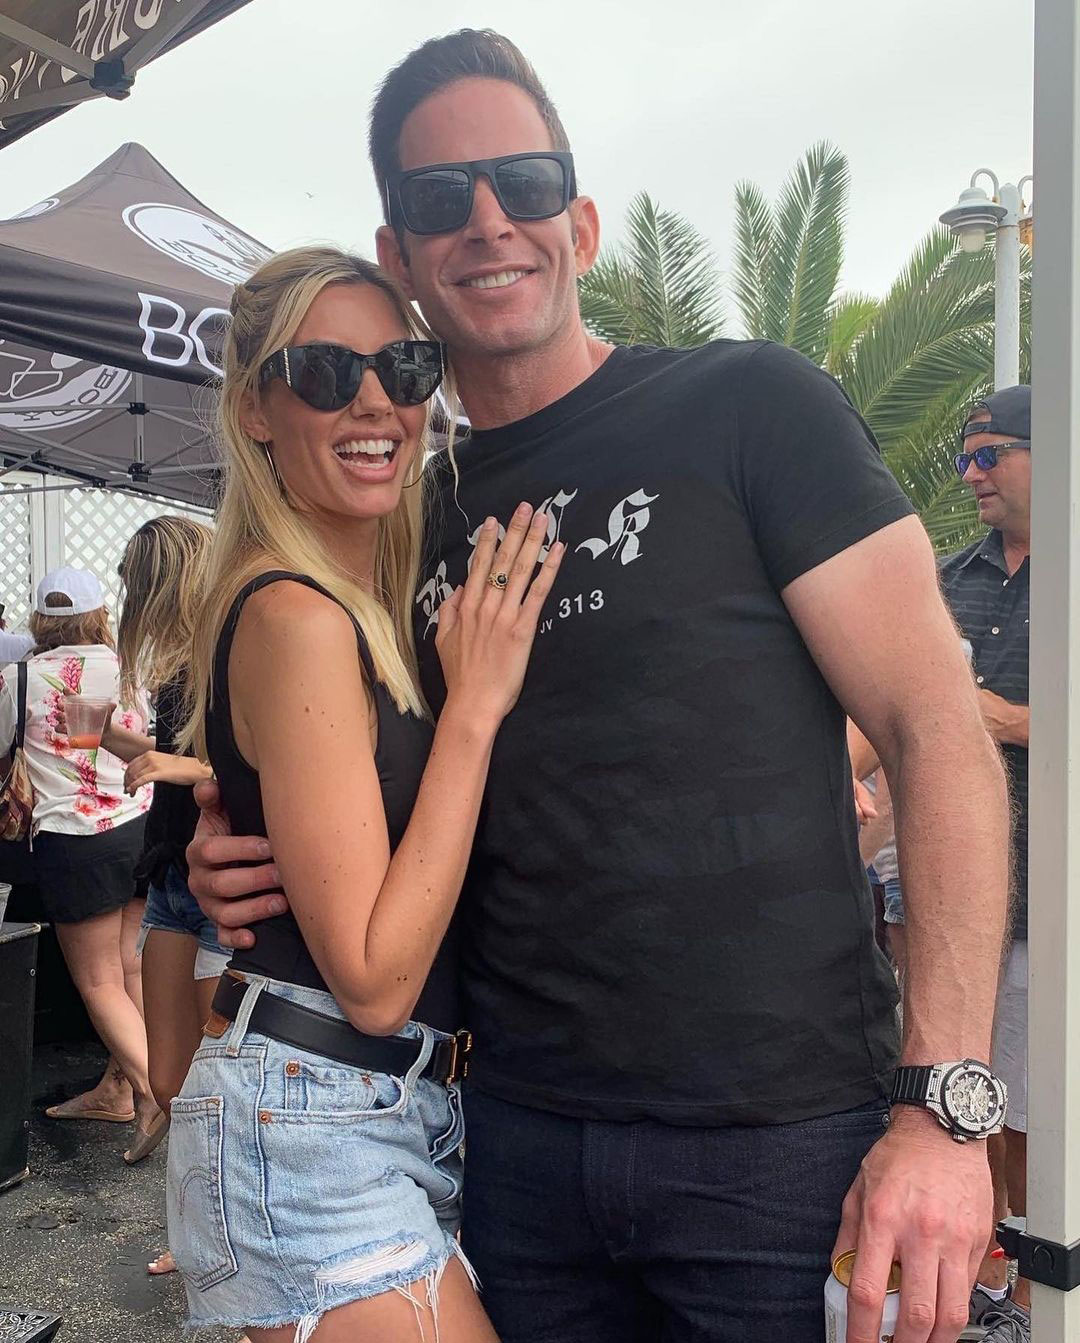 Tarek El Moussa and Heather Rae Young’s Timeline